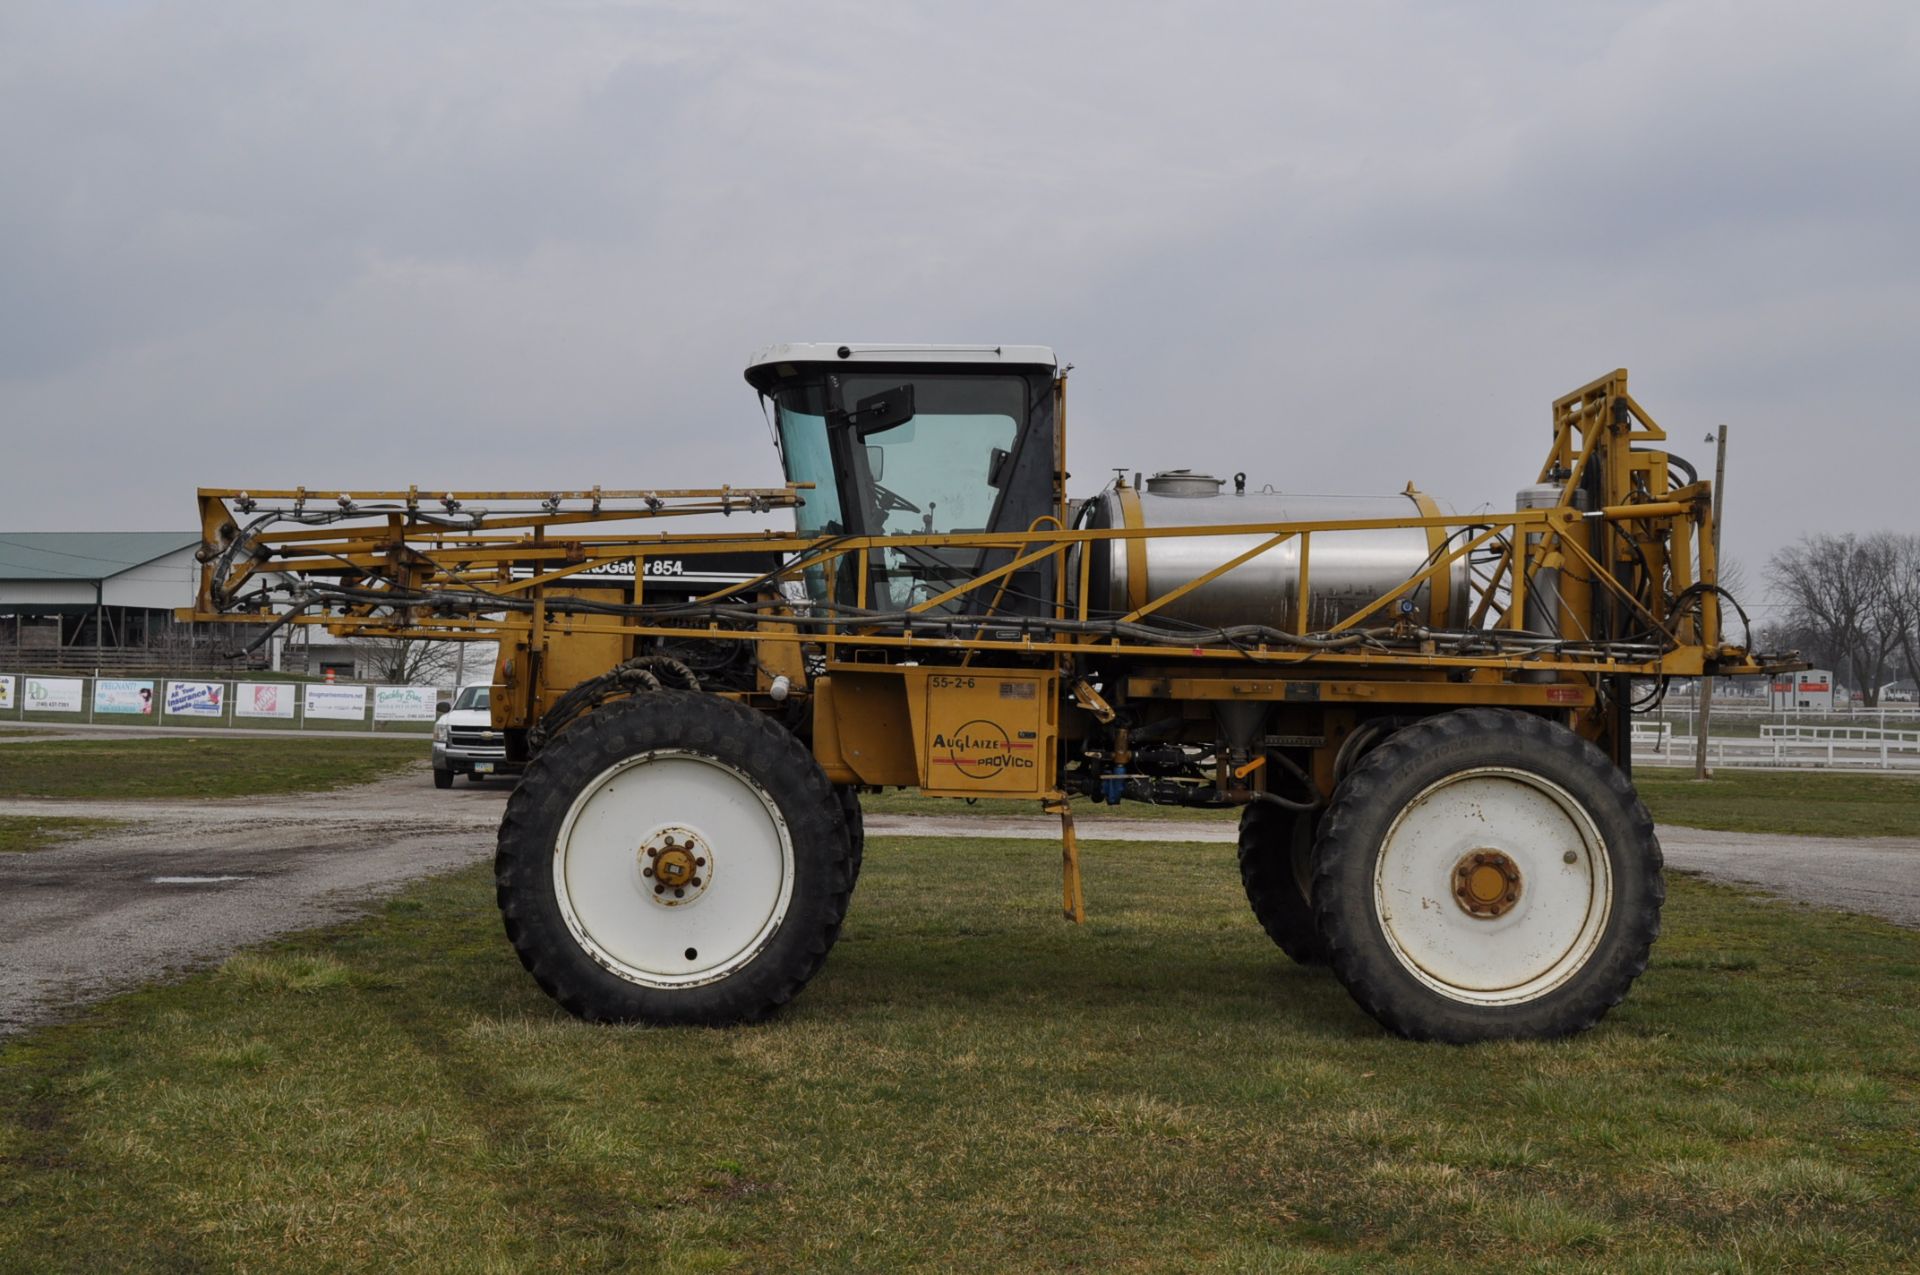 1996 Rogator 854 w/80’ booms, 800 gallon SS tank, 4748 hrs - Image 2 of 20